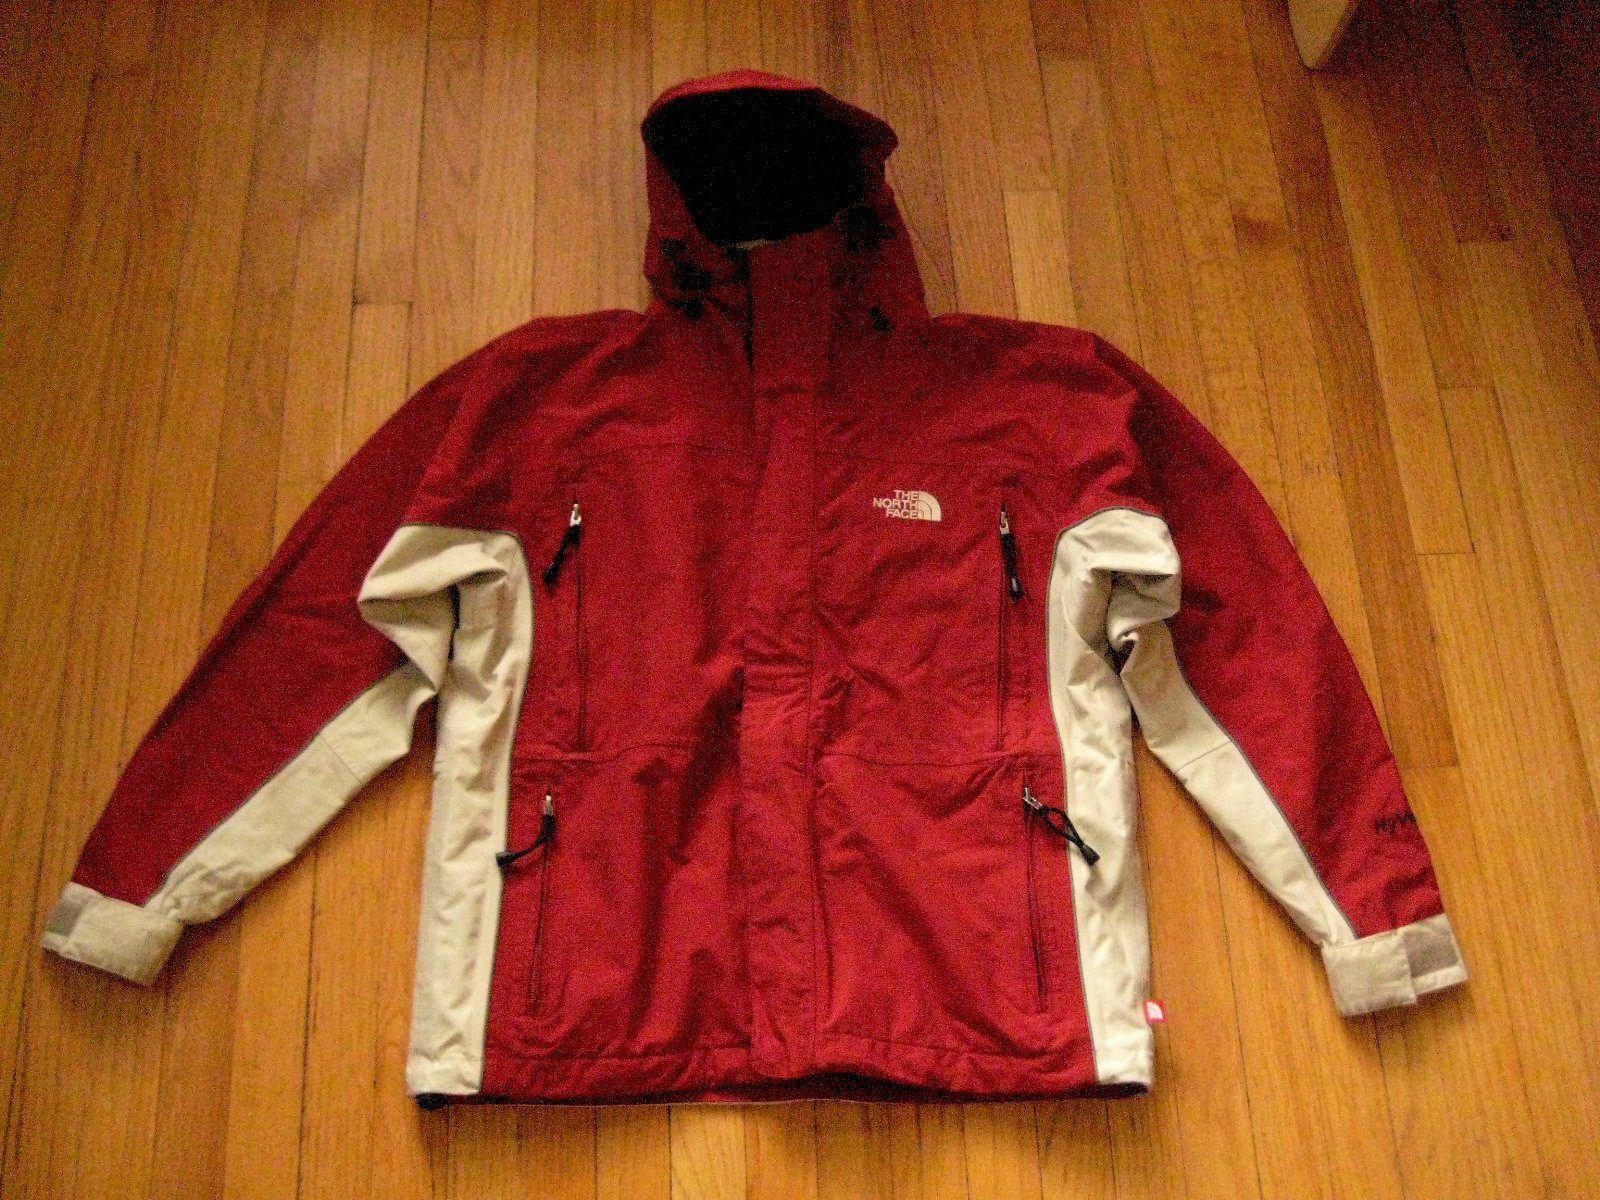 Women's Size Small North Face jacket